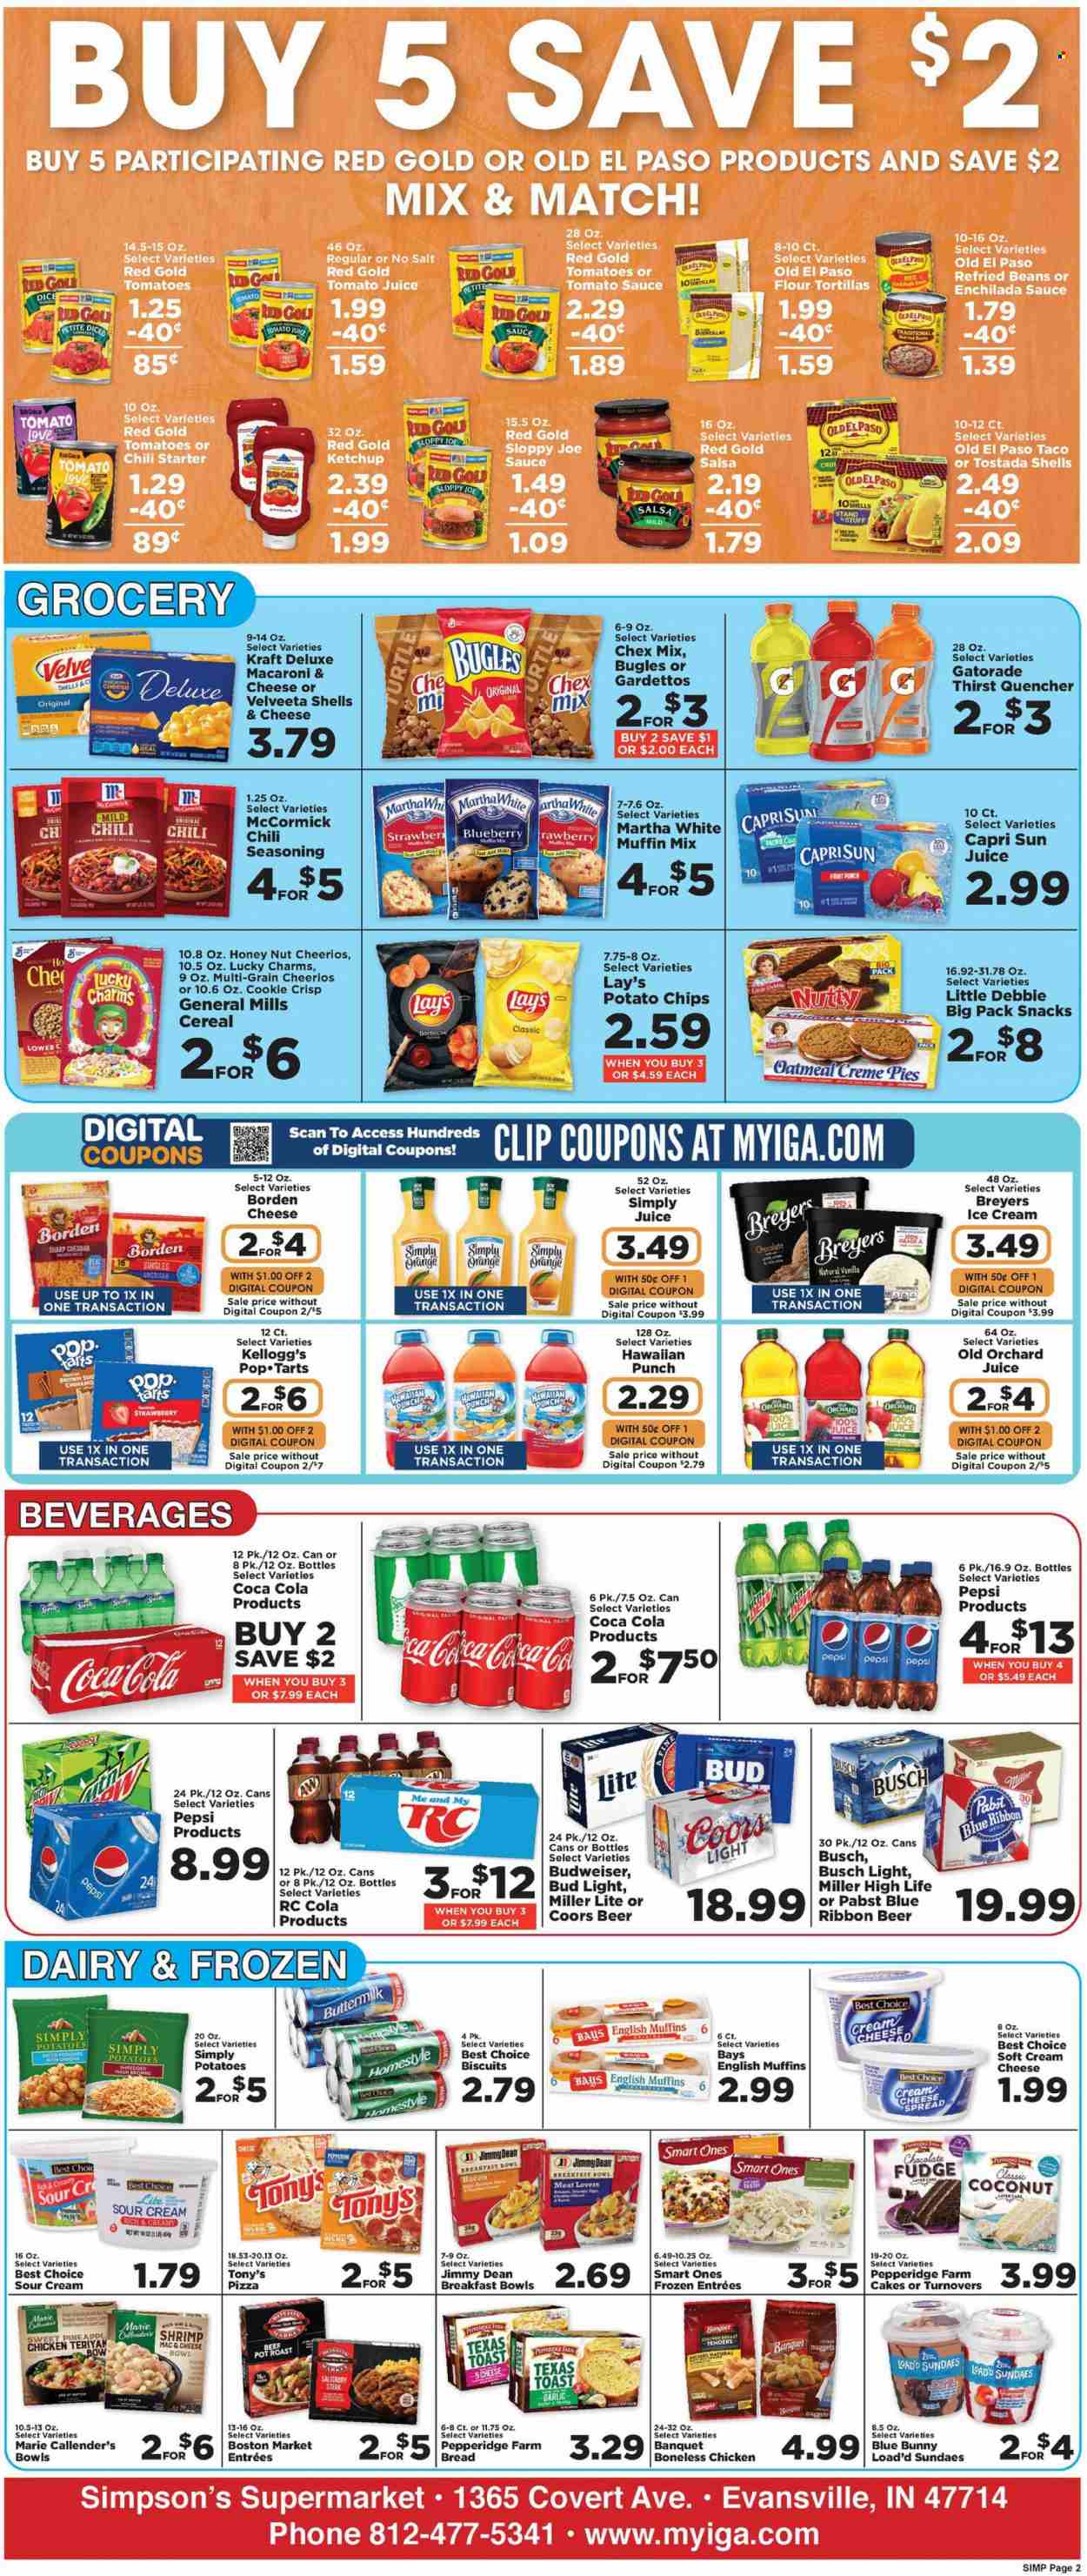 thumbnail - IGA Flyer - 09/28/2022 - 10/04/2022 - Sales products - bread, english muffins, tortillas, cake, Old El Paso, turnovers, flour tortillas, muffin mix, beans, coconut, shrimps, macaroni & cheese, pizza, sauce, breakfast bowl, Marie Callender's, Kraft®, Jimmy Dean, cream cheese, buttermilk, sour cream, ice cream, Blue Bunny, fudge, snack, Kellogg's, biscuit, Pop-Tarts, potato chips, Lay’s, Chex Mix, oatmeal, enchilada sauce, refried beans, tomato sauce, cereals, Cheerios, spice, ketchup, salsa, Capri Sun, Coca-Cola, tomato juice, Pepsi, juice, Gatorade, beer, Busch, Bud Light, Pabst Blue Ribbon, pot, Budweiser, Miller Lite, Coors. Page 3.